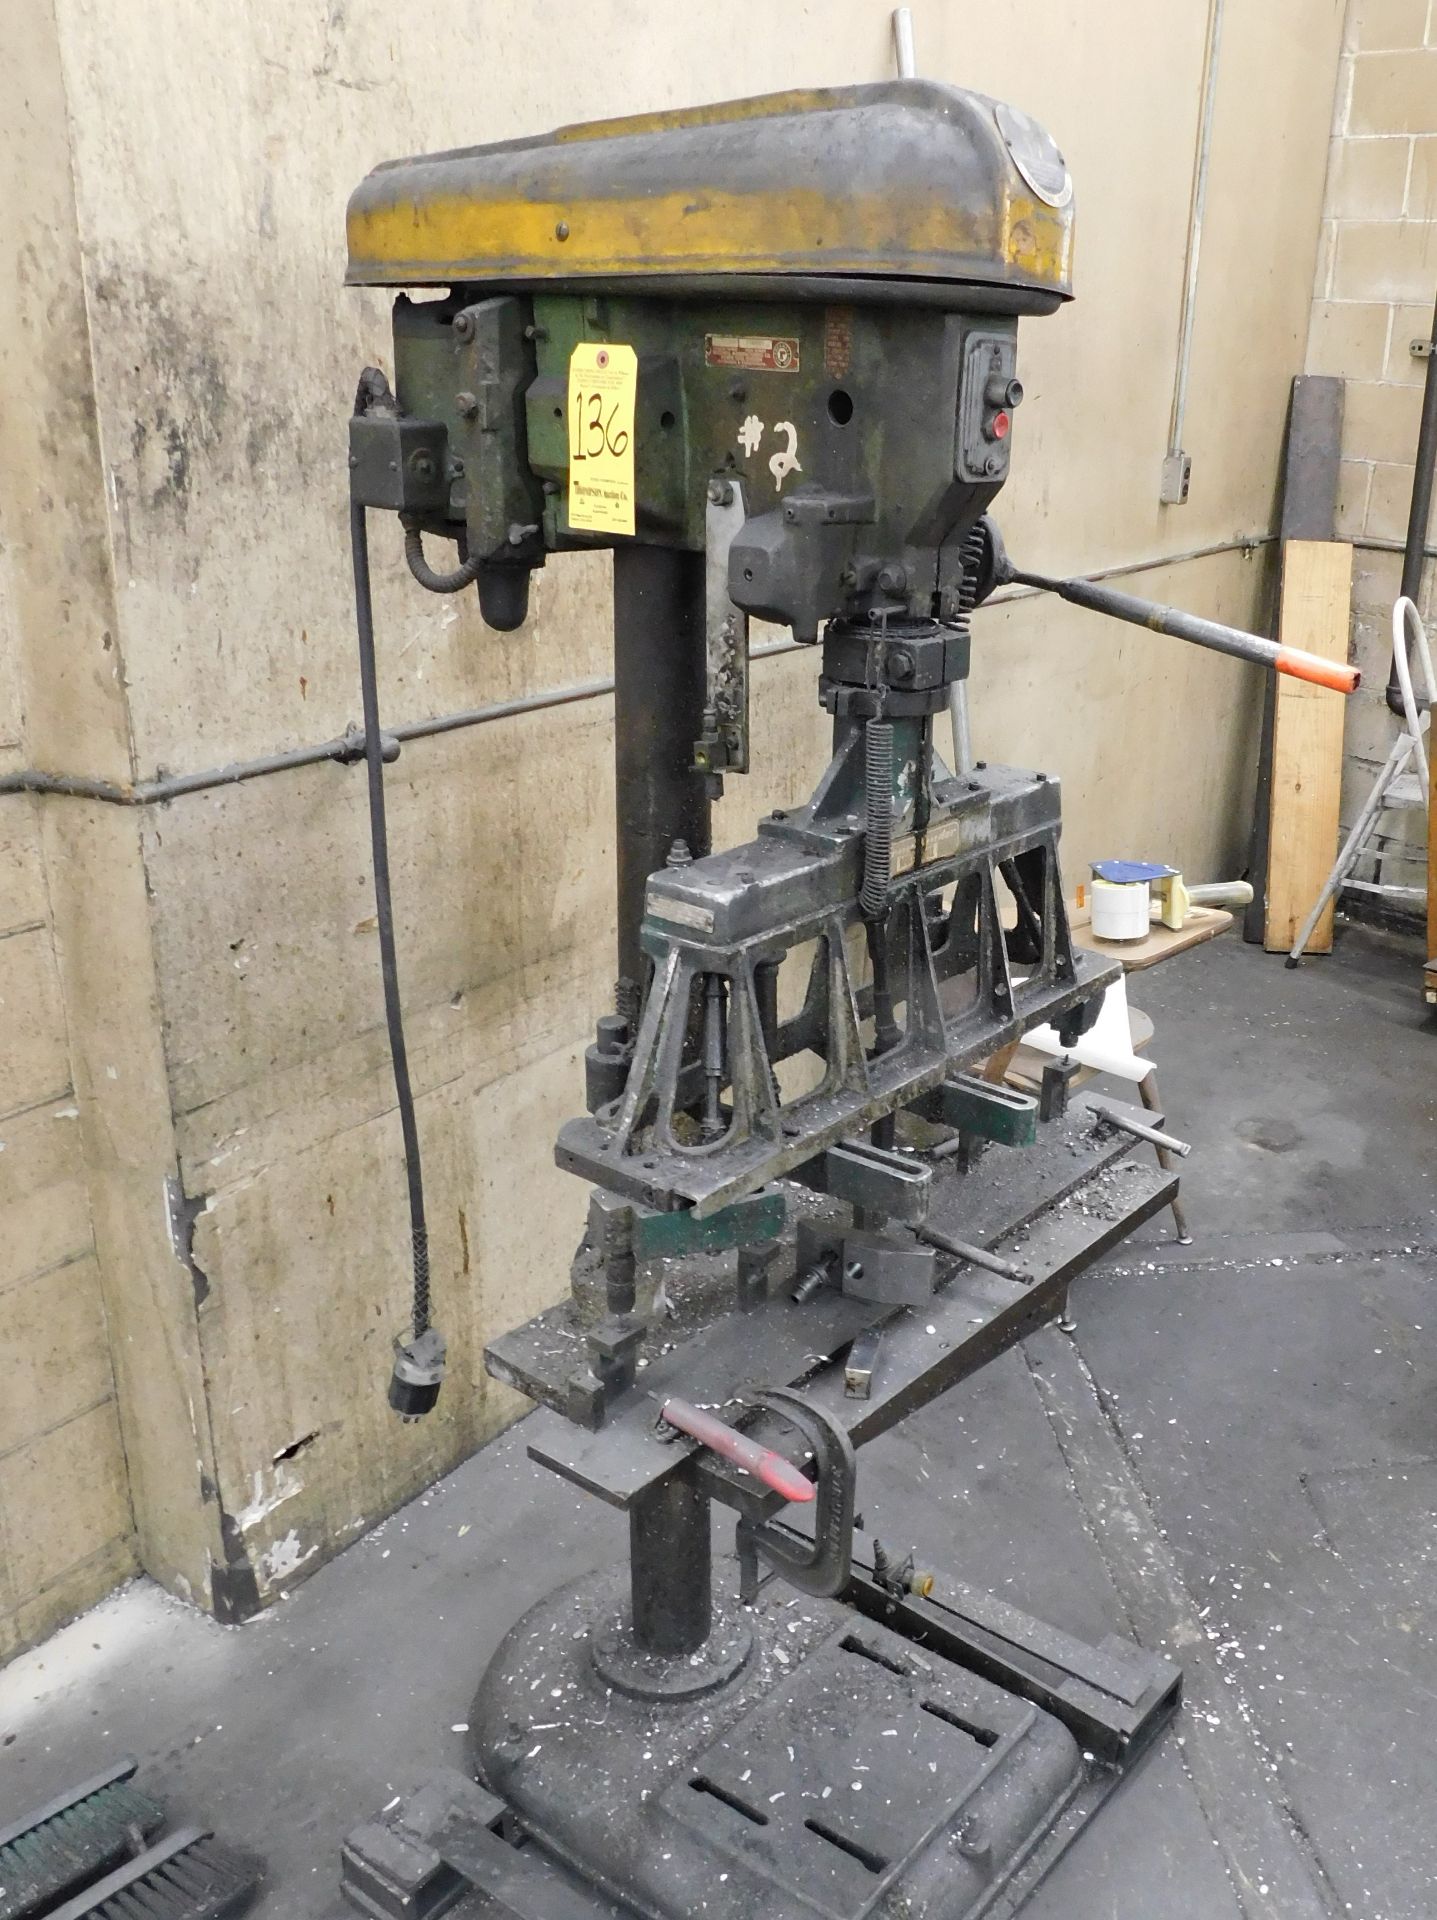 Delta Rockwell 17" Single Spindle Drill Press, s/n 128/283, with Commander Drill Head